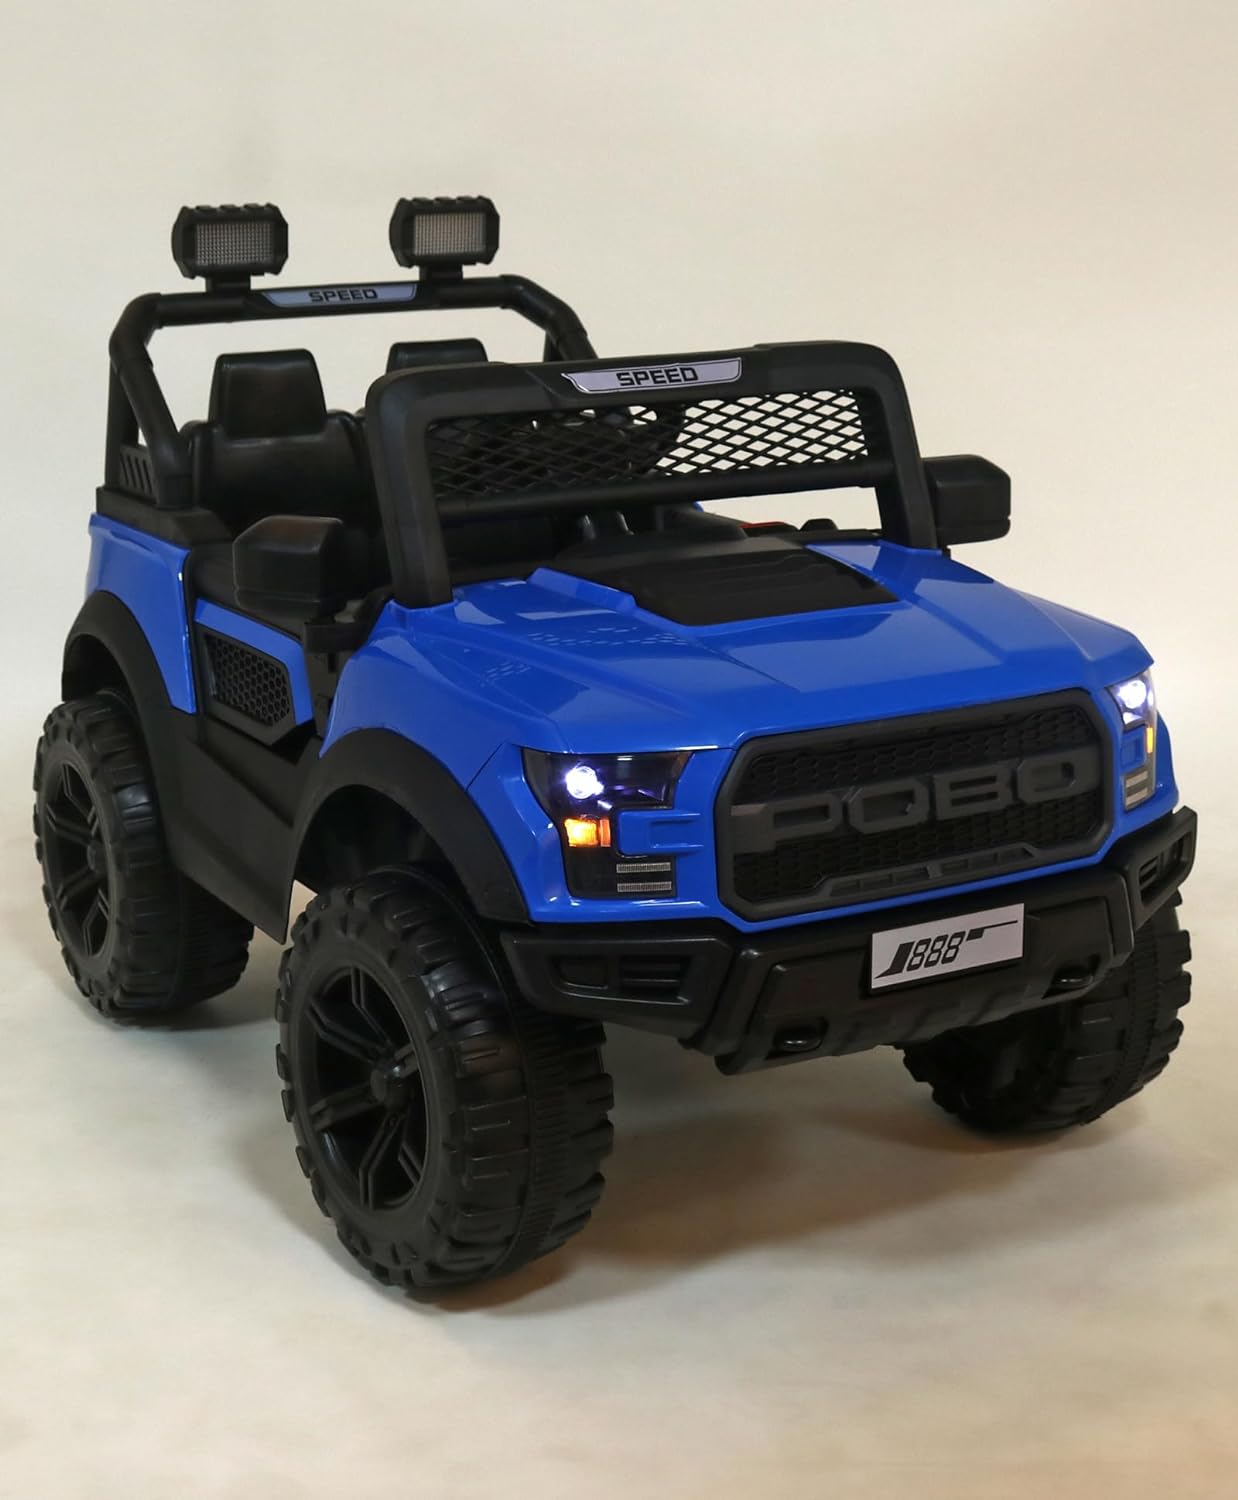 Jammbo POBO Battery Operated Premium Jeep for Kids- Blue